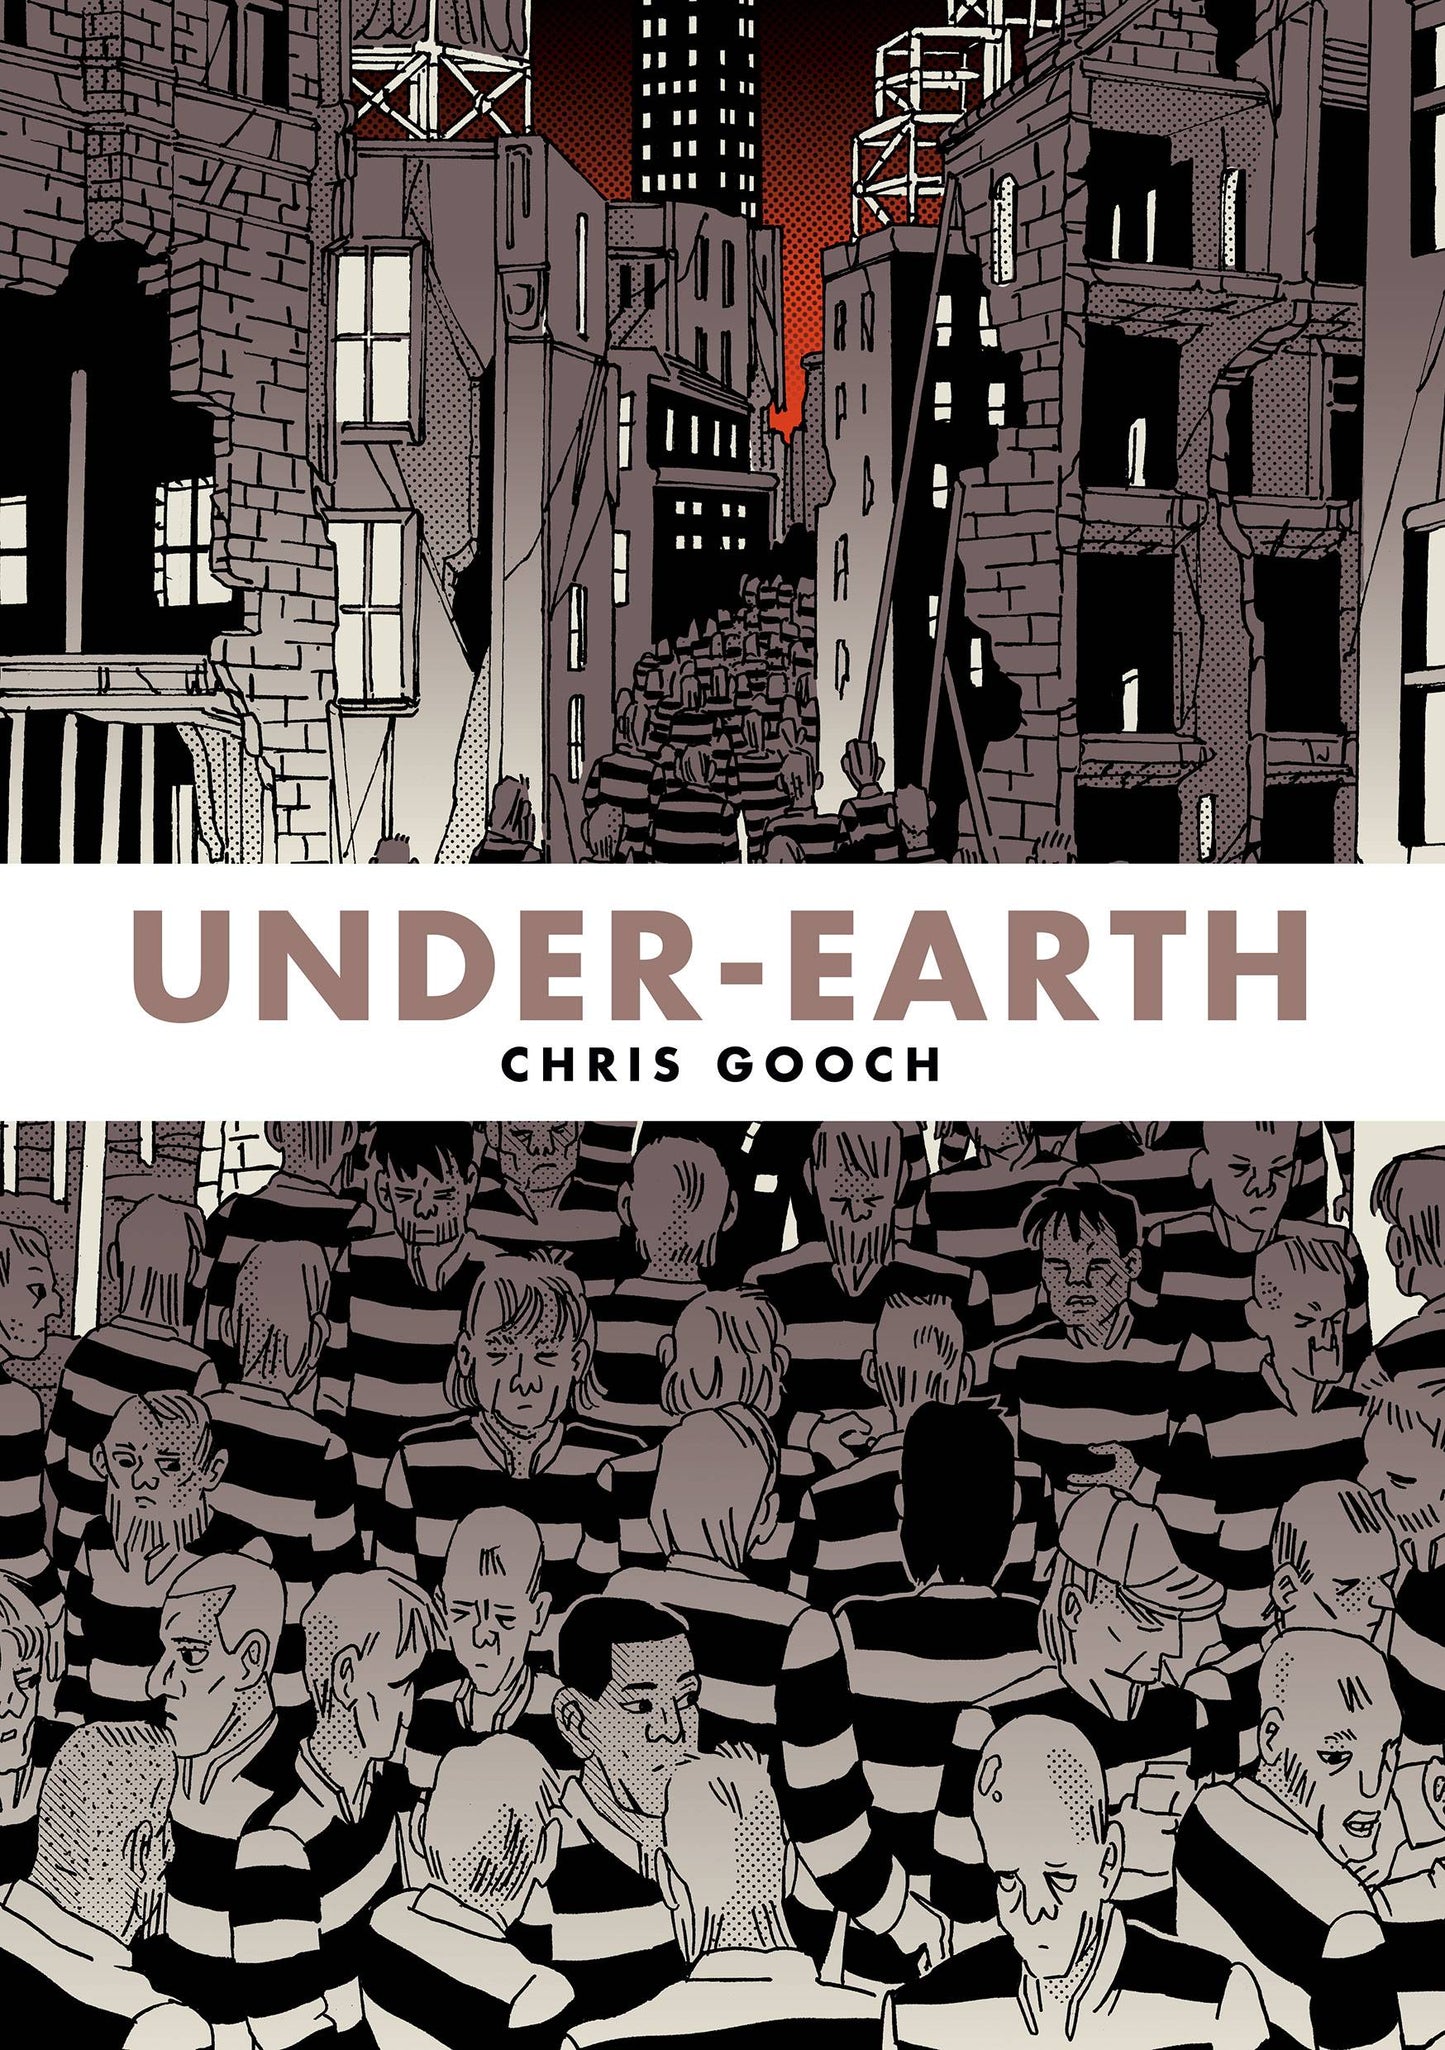 Under Earth